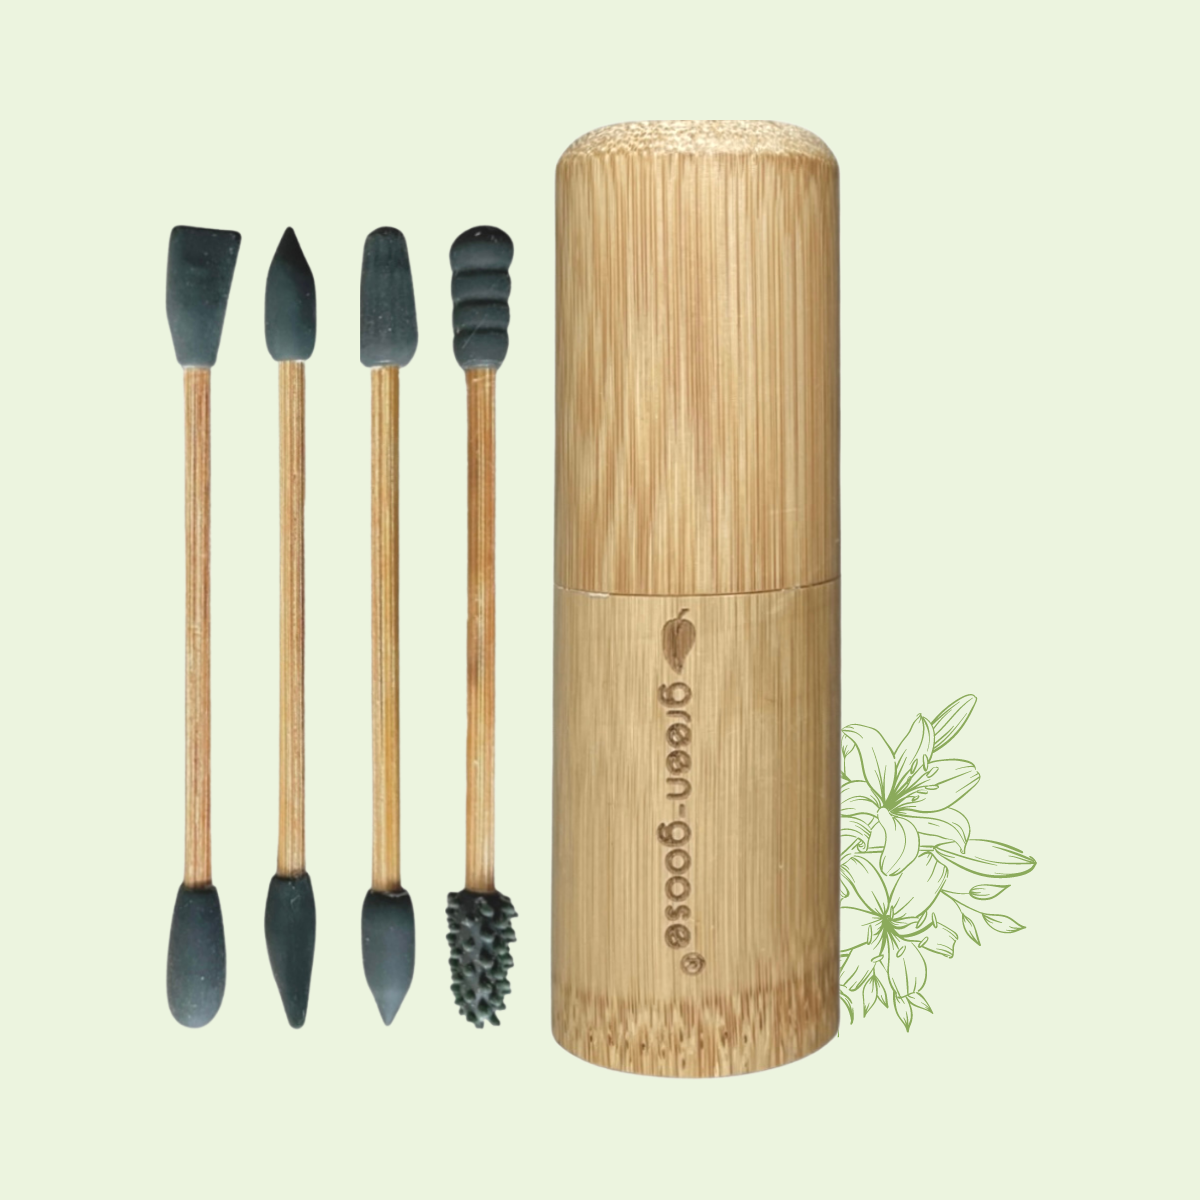 4 Reusable Cotton Swabs with Bamboo Holder